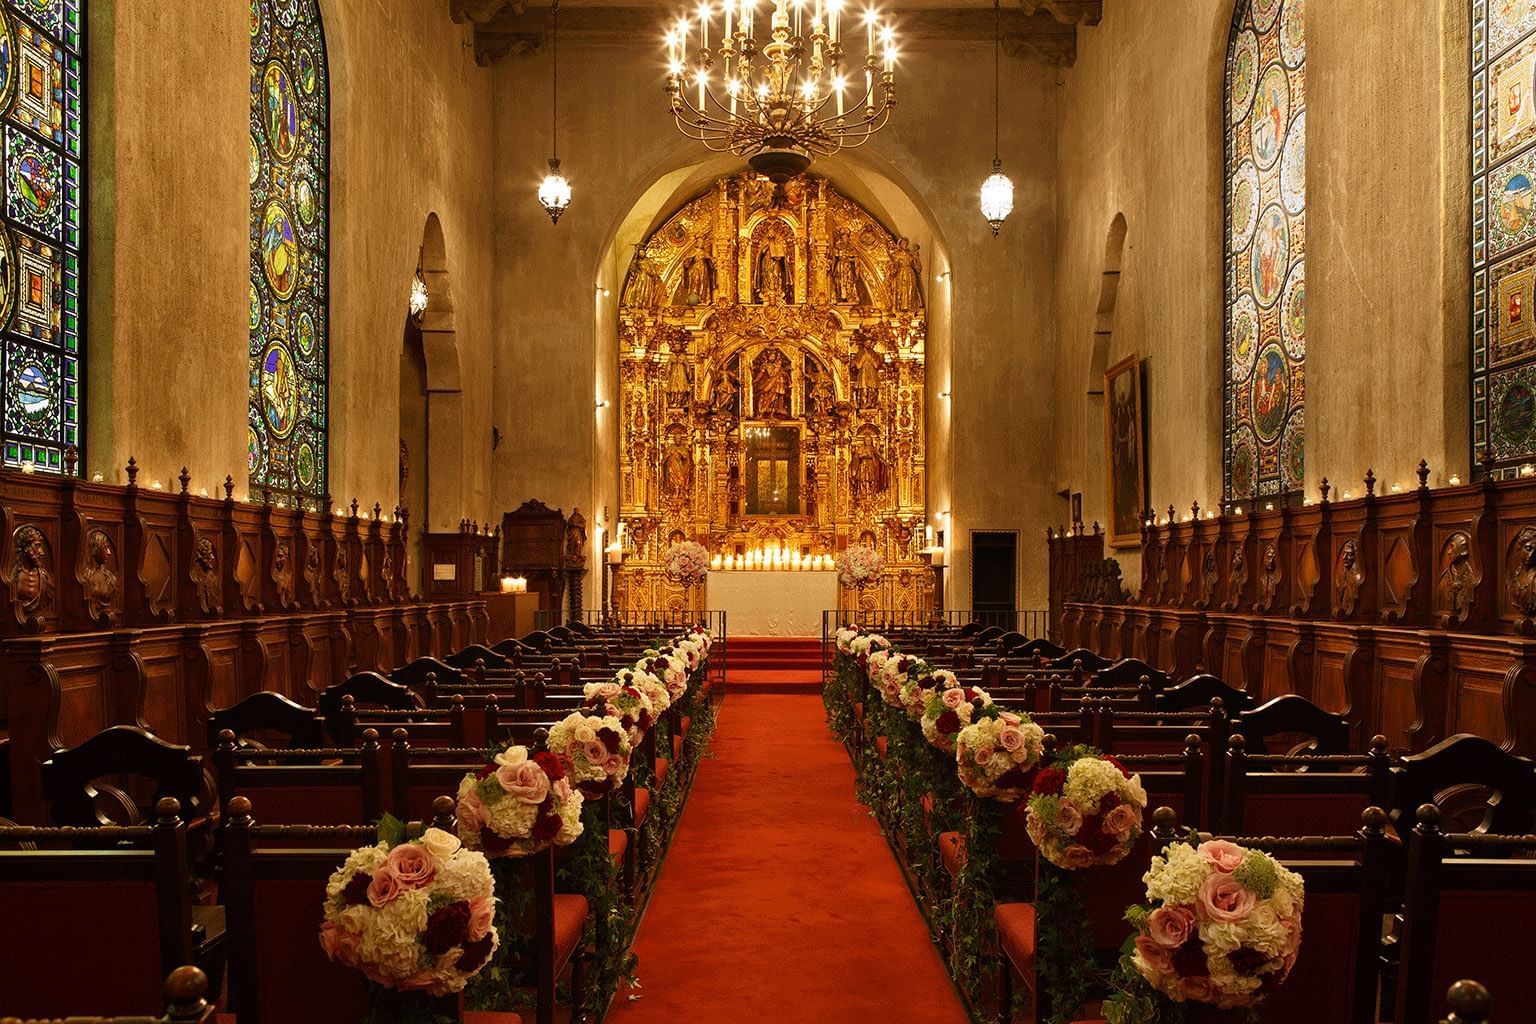 St. Francis of Assisi chapel with flowers decorating the aisle